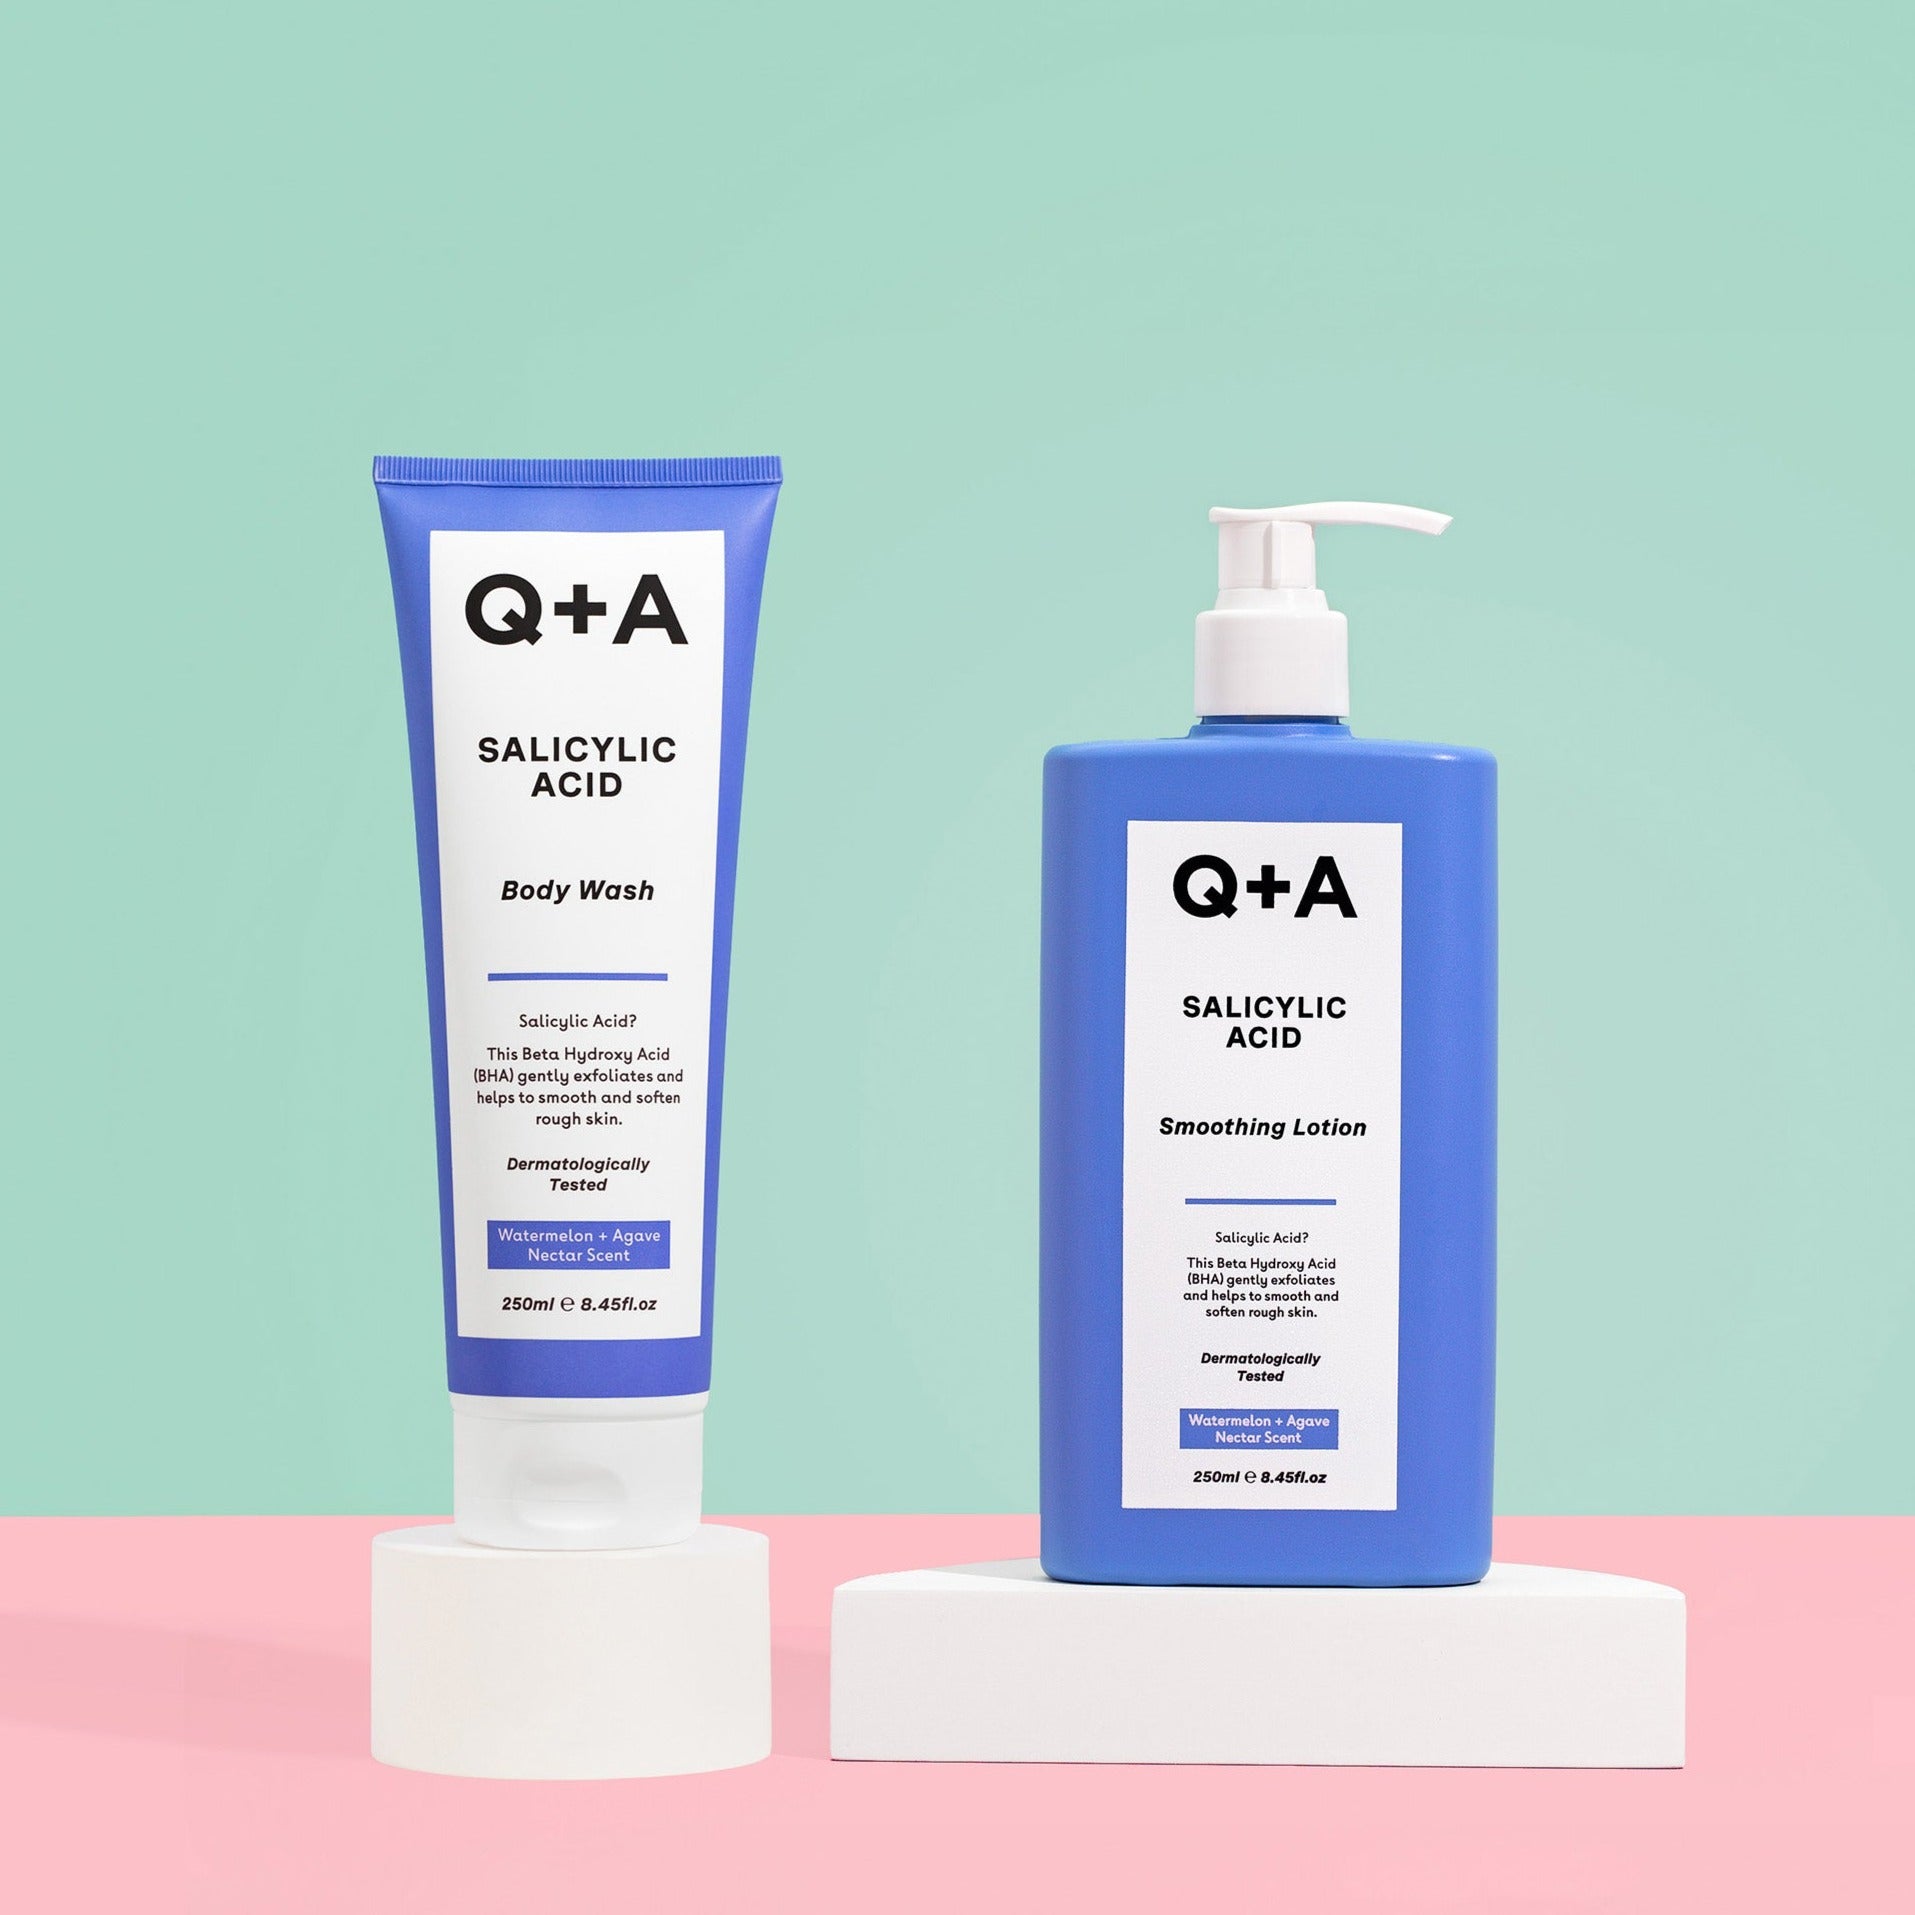 Q+A Skin Smoother Duo